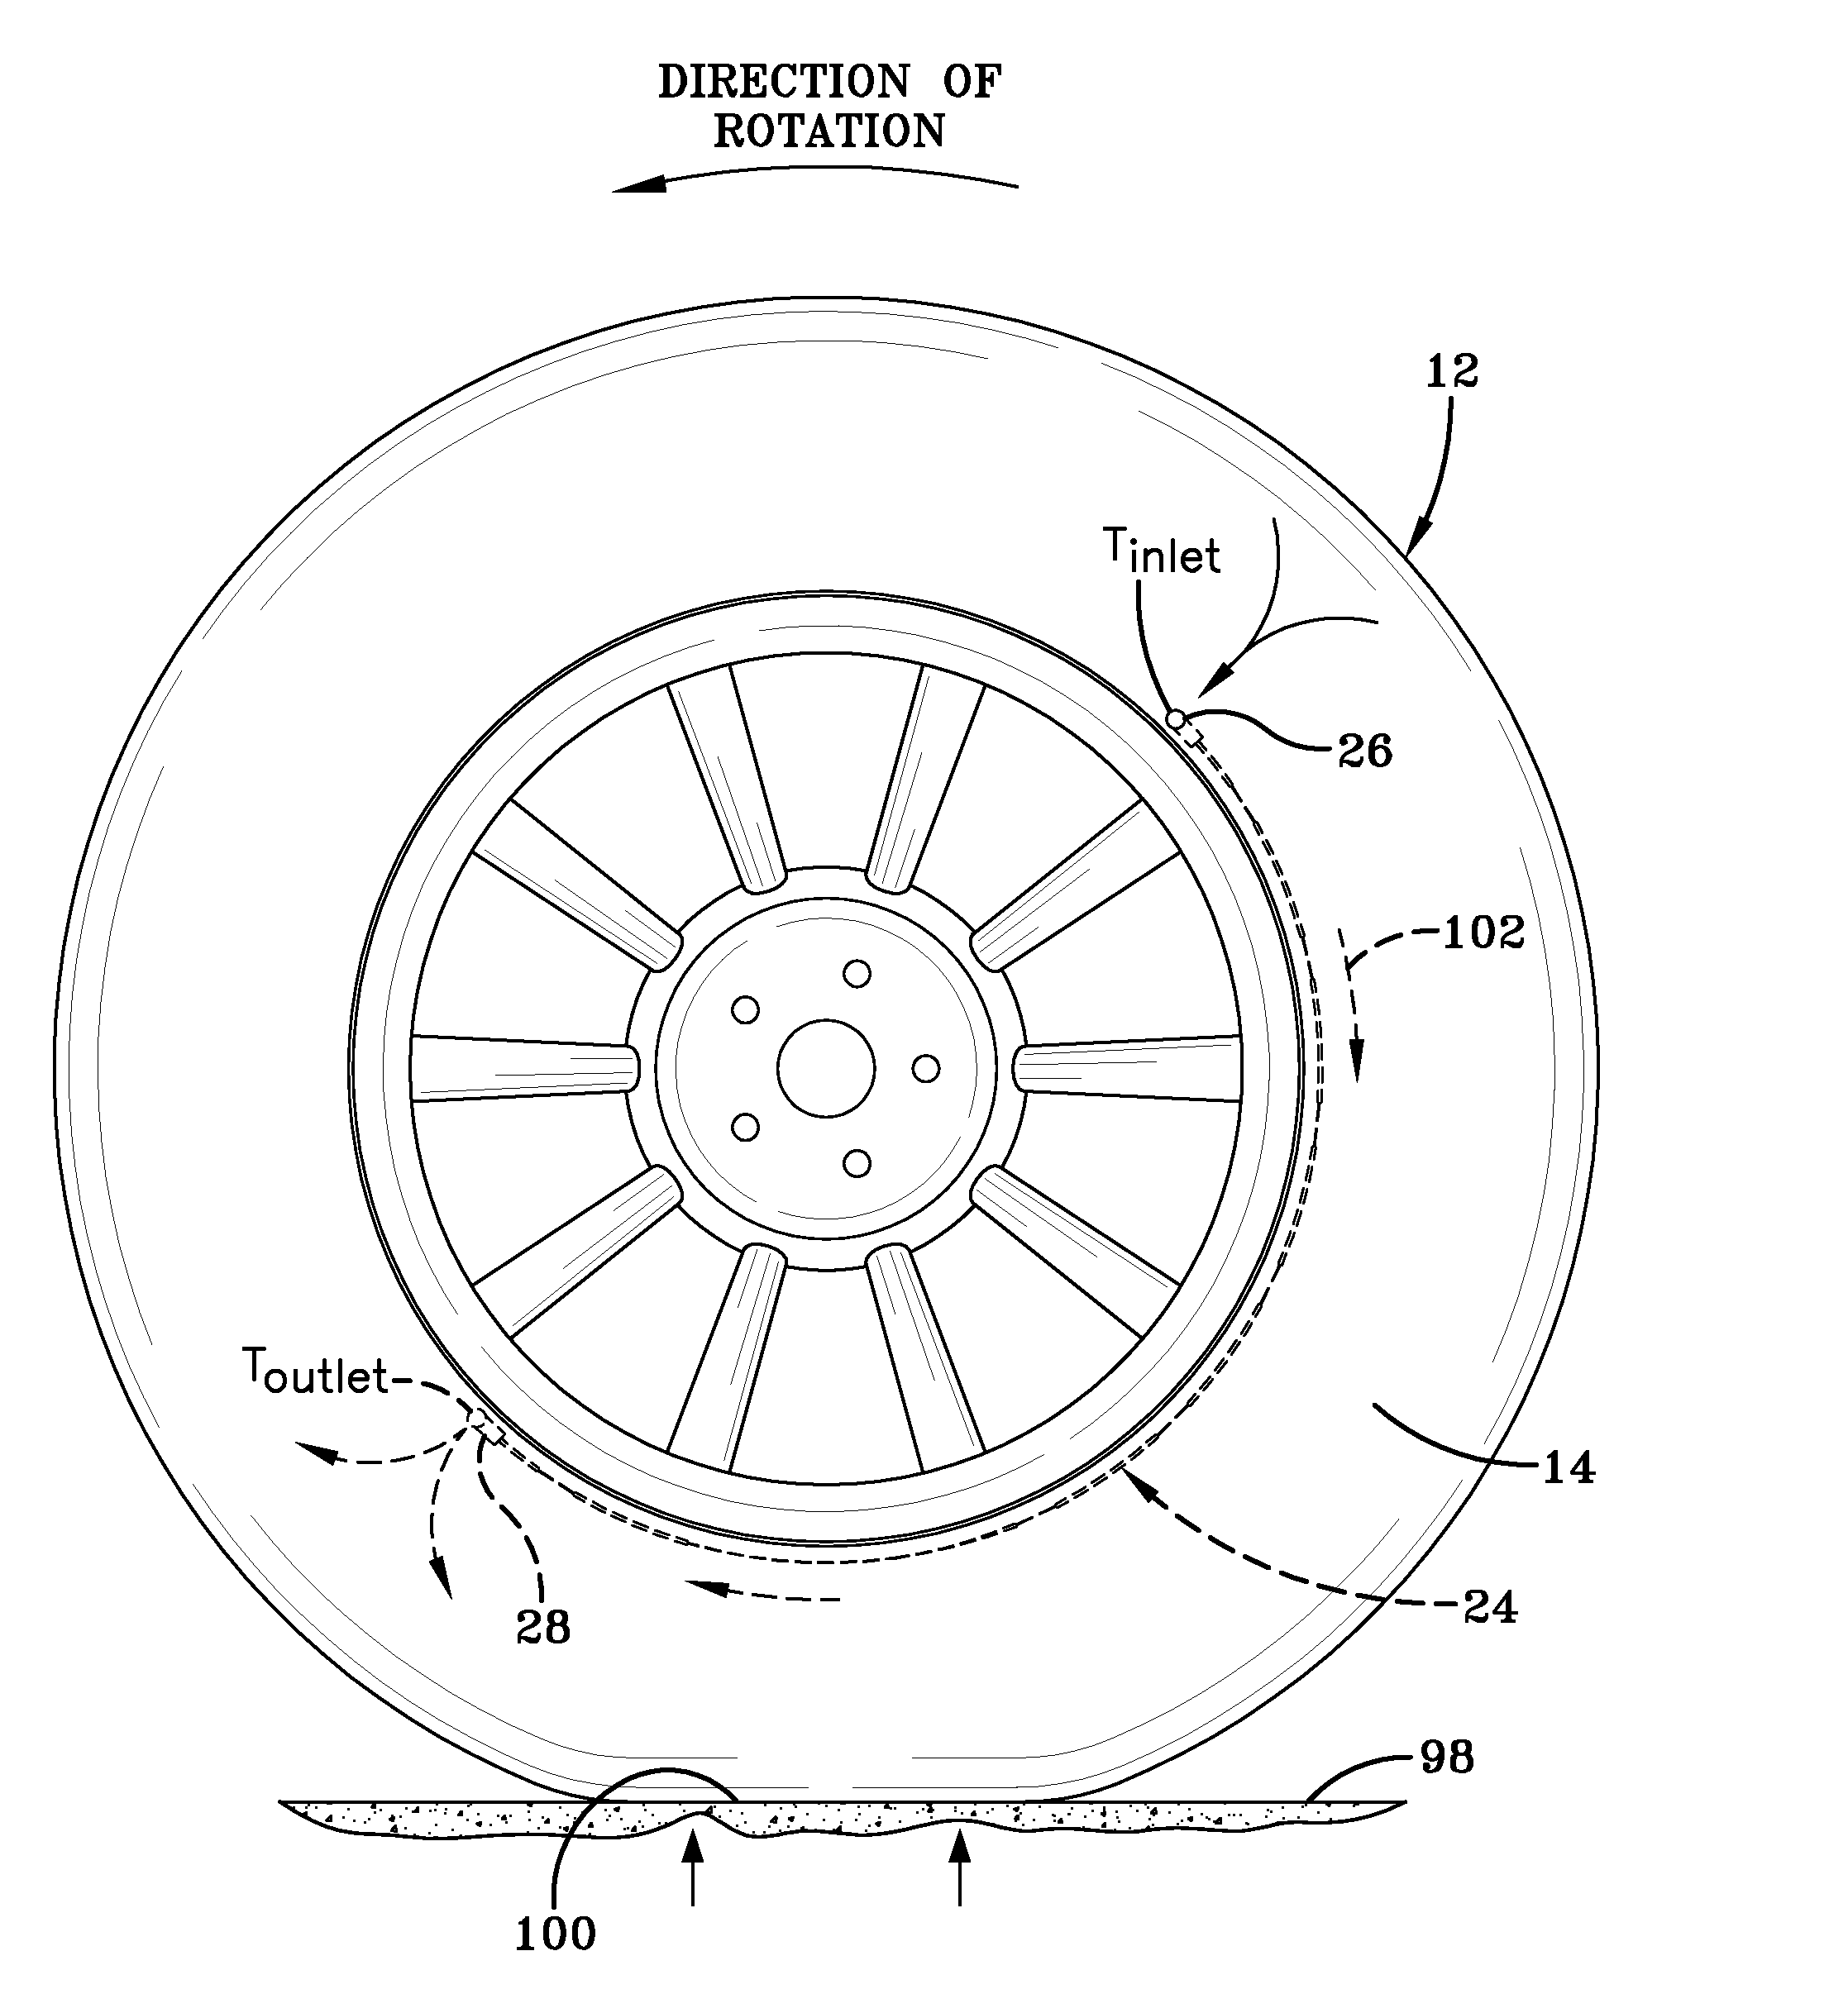 Distributed cavity air pumping assembly and method for a tire